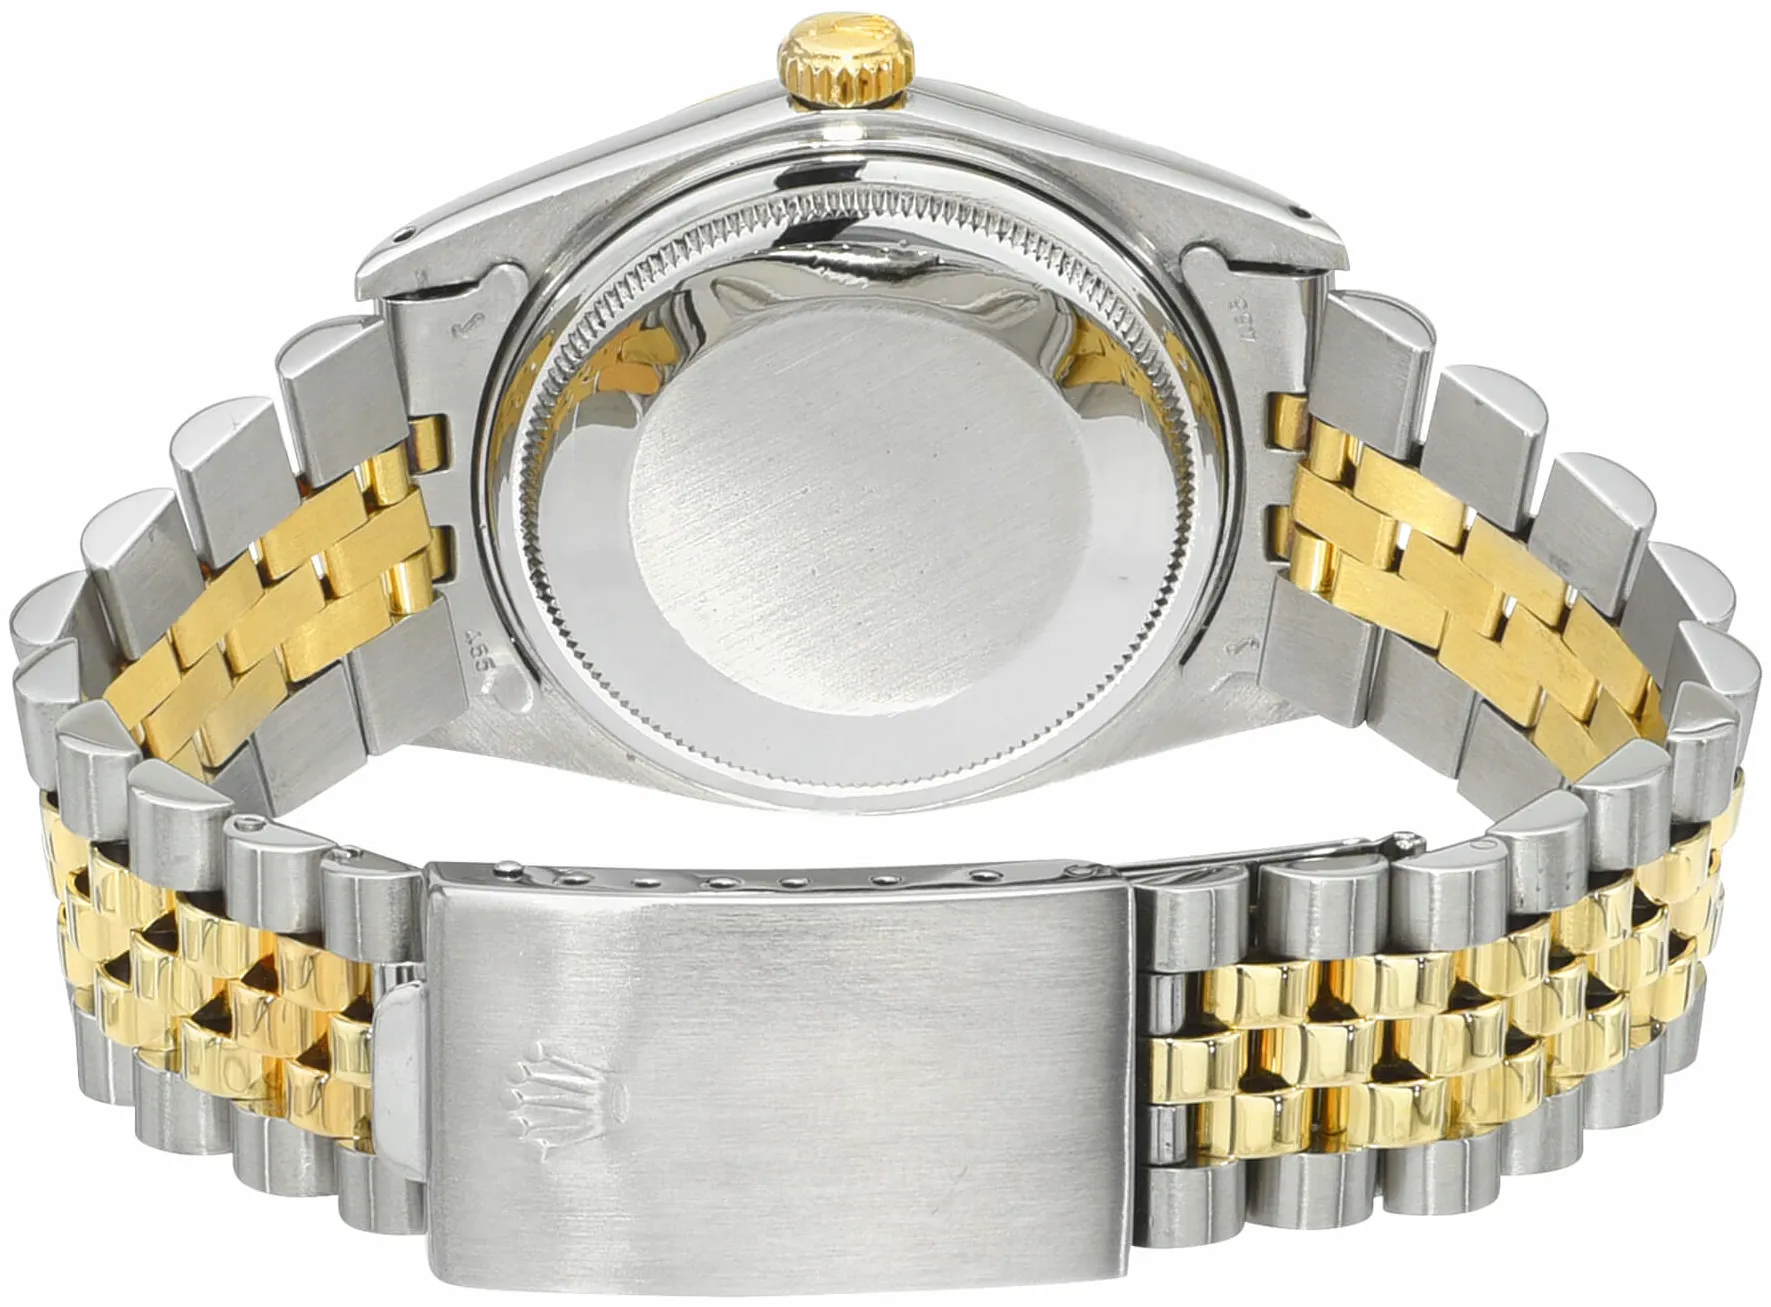 Rolex Datejust 36 16013 36mm Yellow gold and stainless steel 3